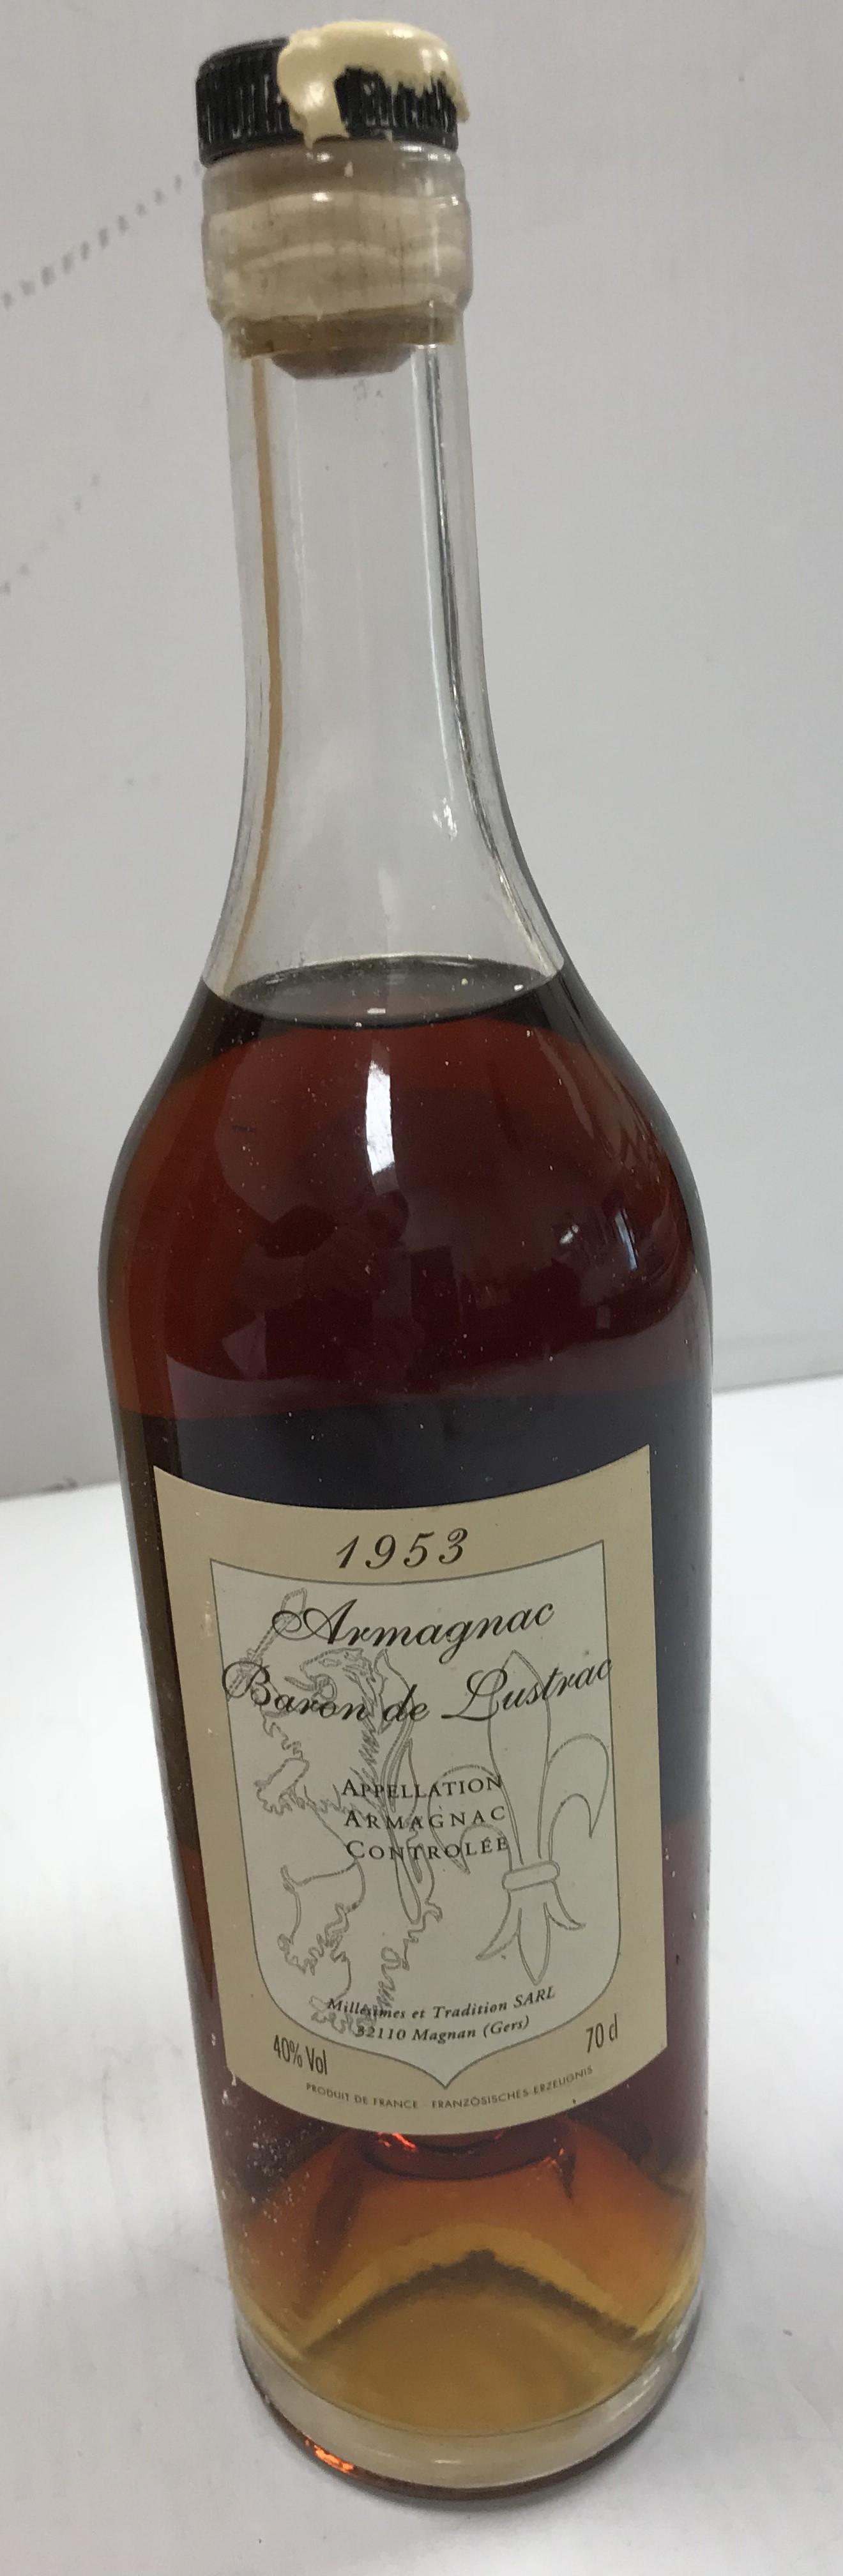 One bottle Armagnac Baron de Lustrac 1953 OWC CONDITION REPORTS Wax seal with damage - Image 2 of 3